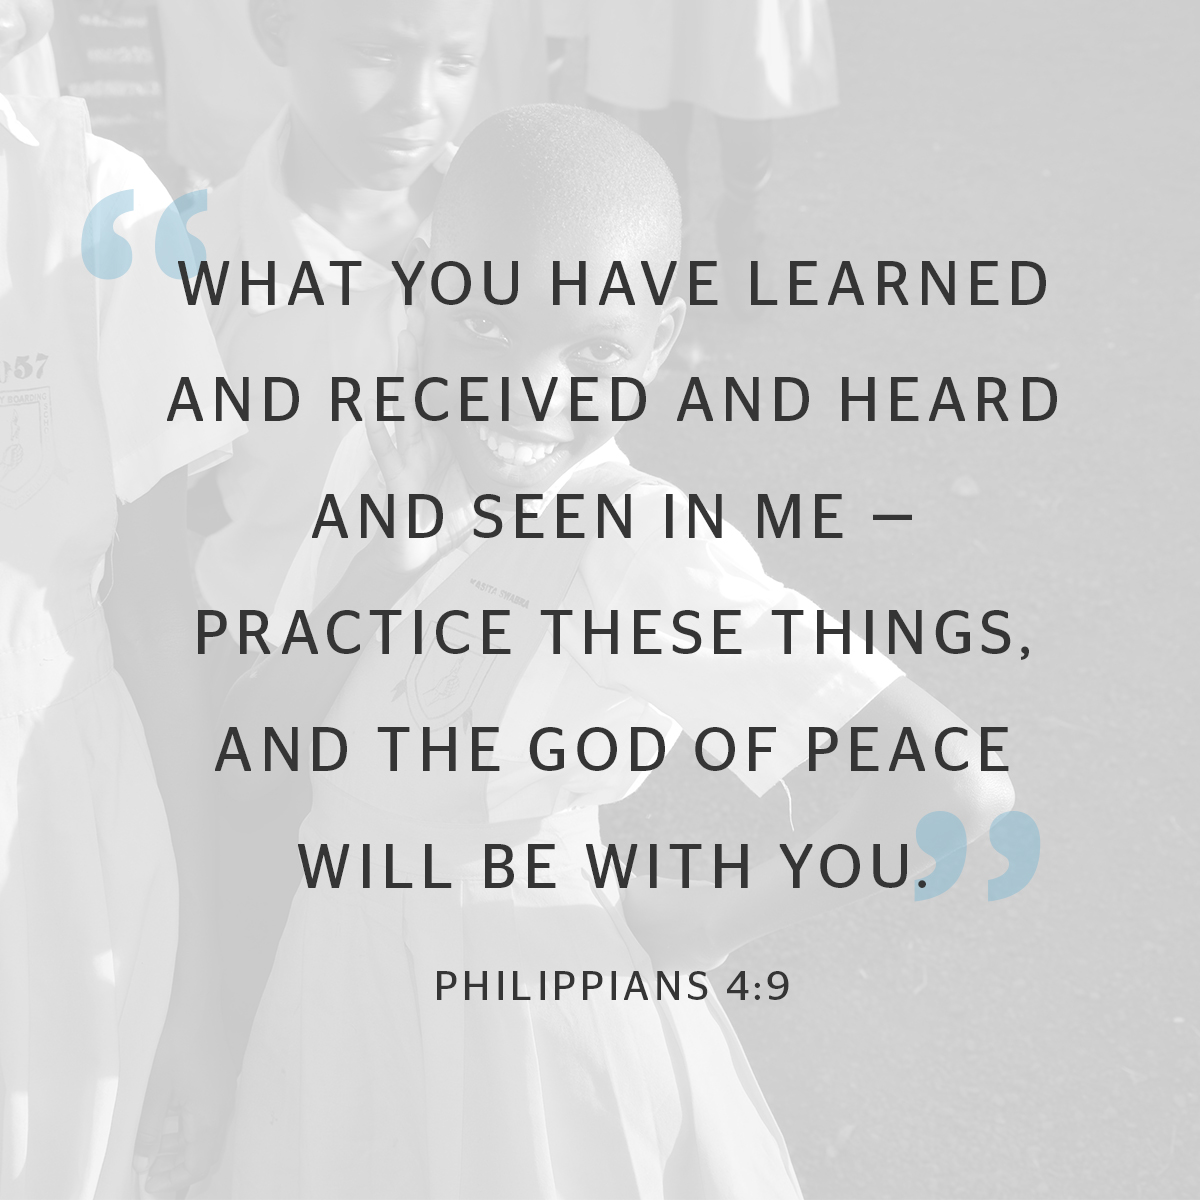 WHAT YOU HAVE LEARNED AND RECEIVED AND HEARD AND SEEN IN ME PRACTICE THESE THINGS, AND THE GOD OF PEACE WILL BE With YOU. 9 PHILIPPIANS 4.9